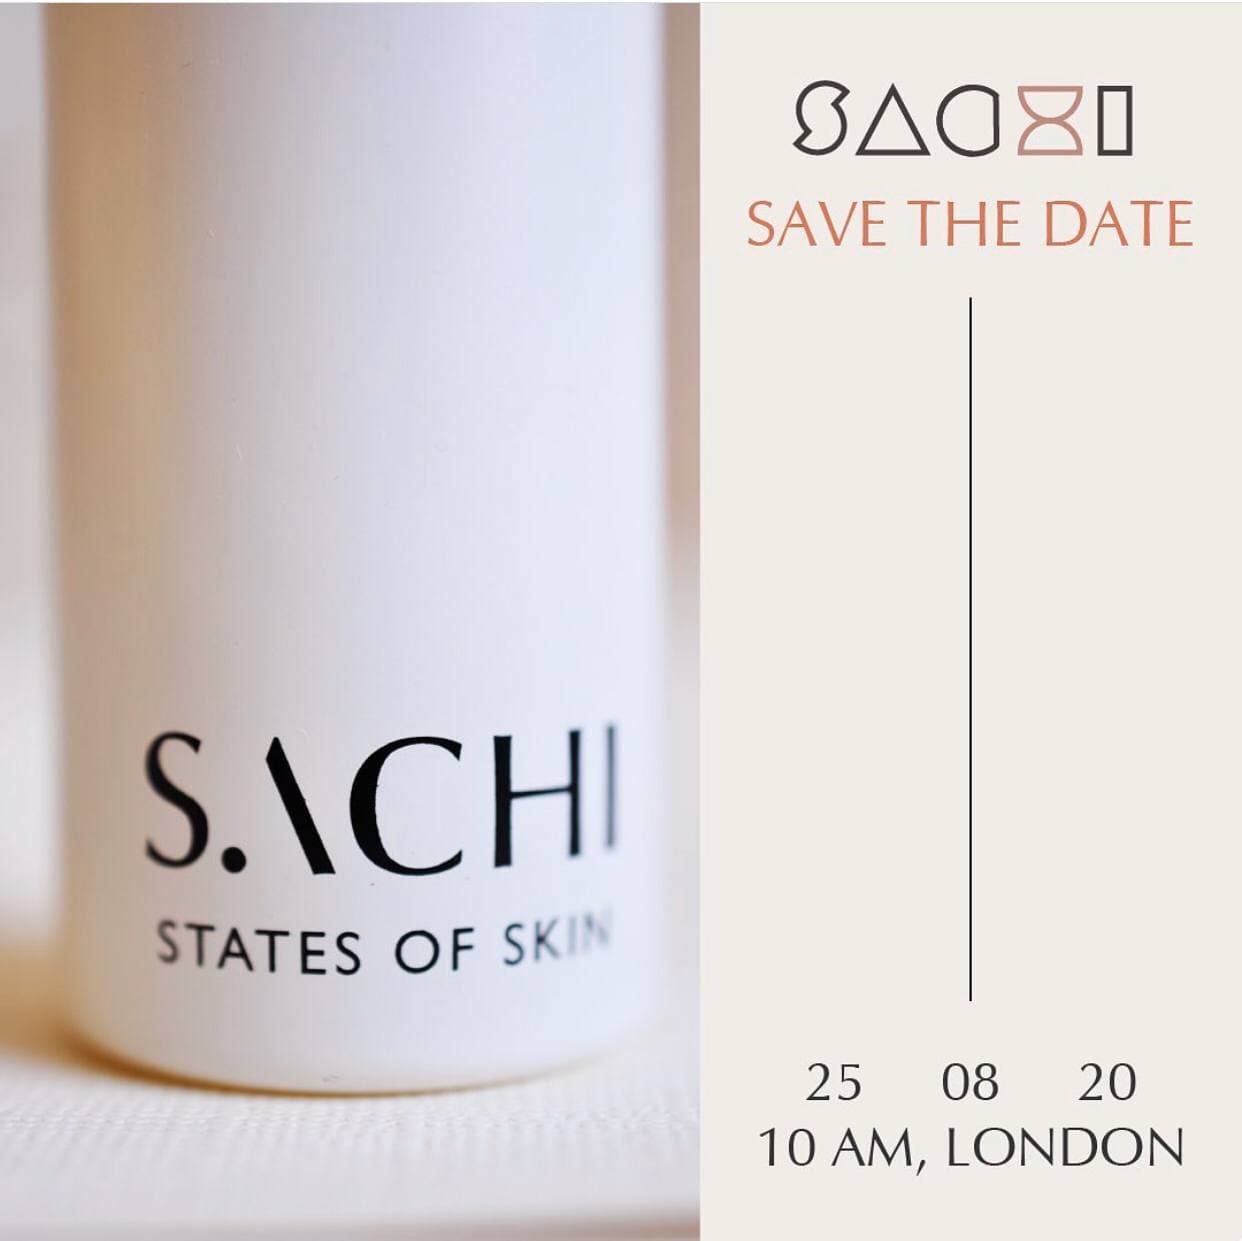 Sachi Skin: Launching our Preorders